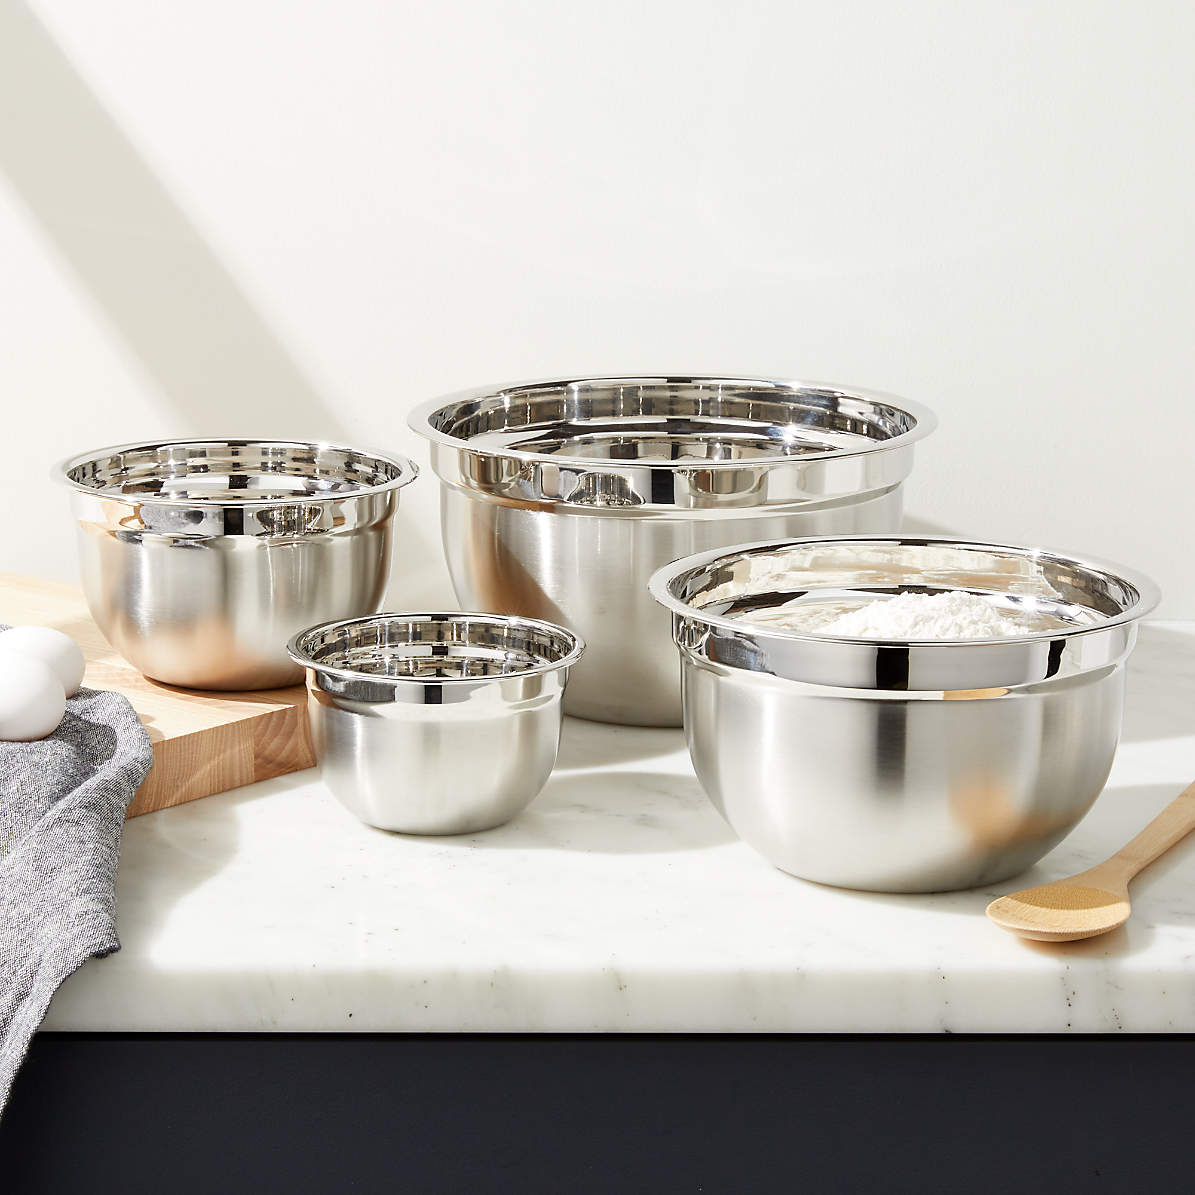 Stainless Steel 5-Quart Bowl | Crate & Barrel